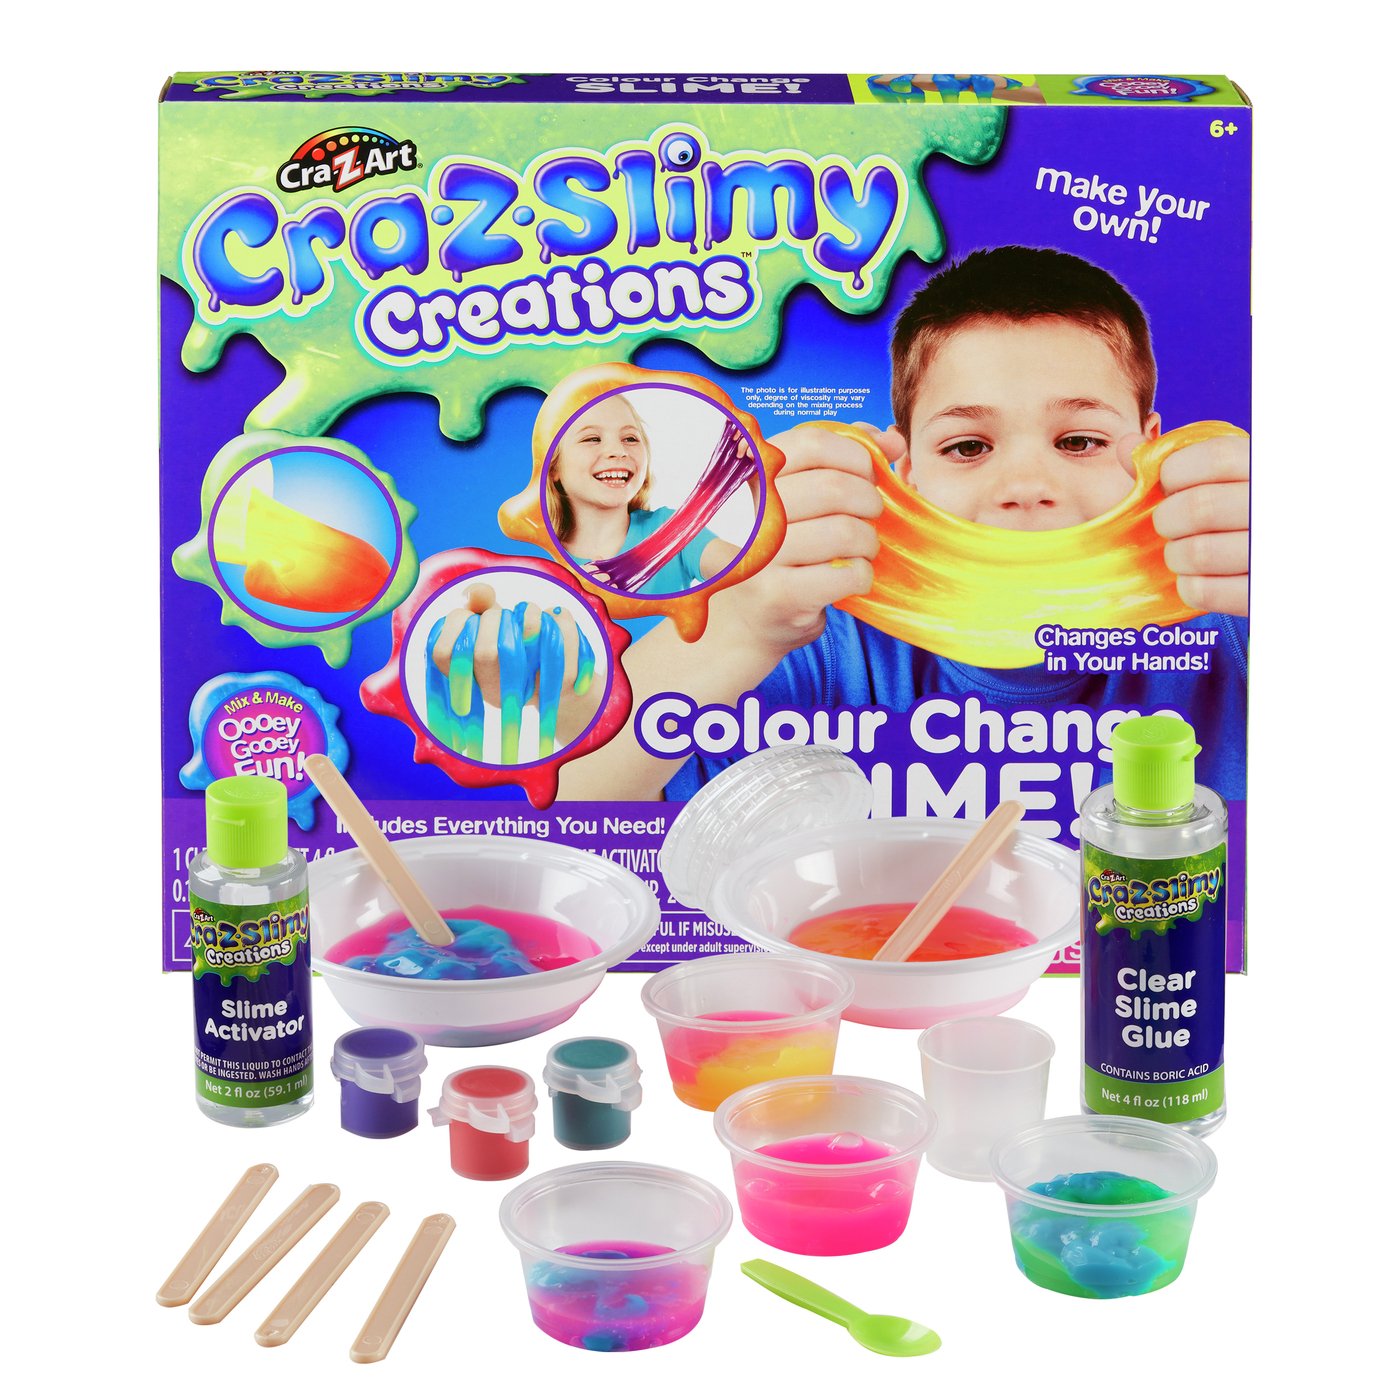 Cra-Z-Slimy Deluxe Colour Change Kit Review